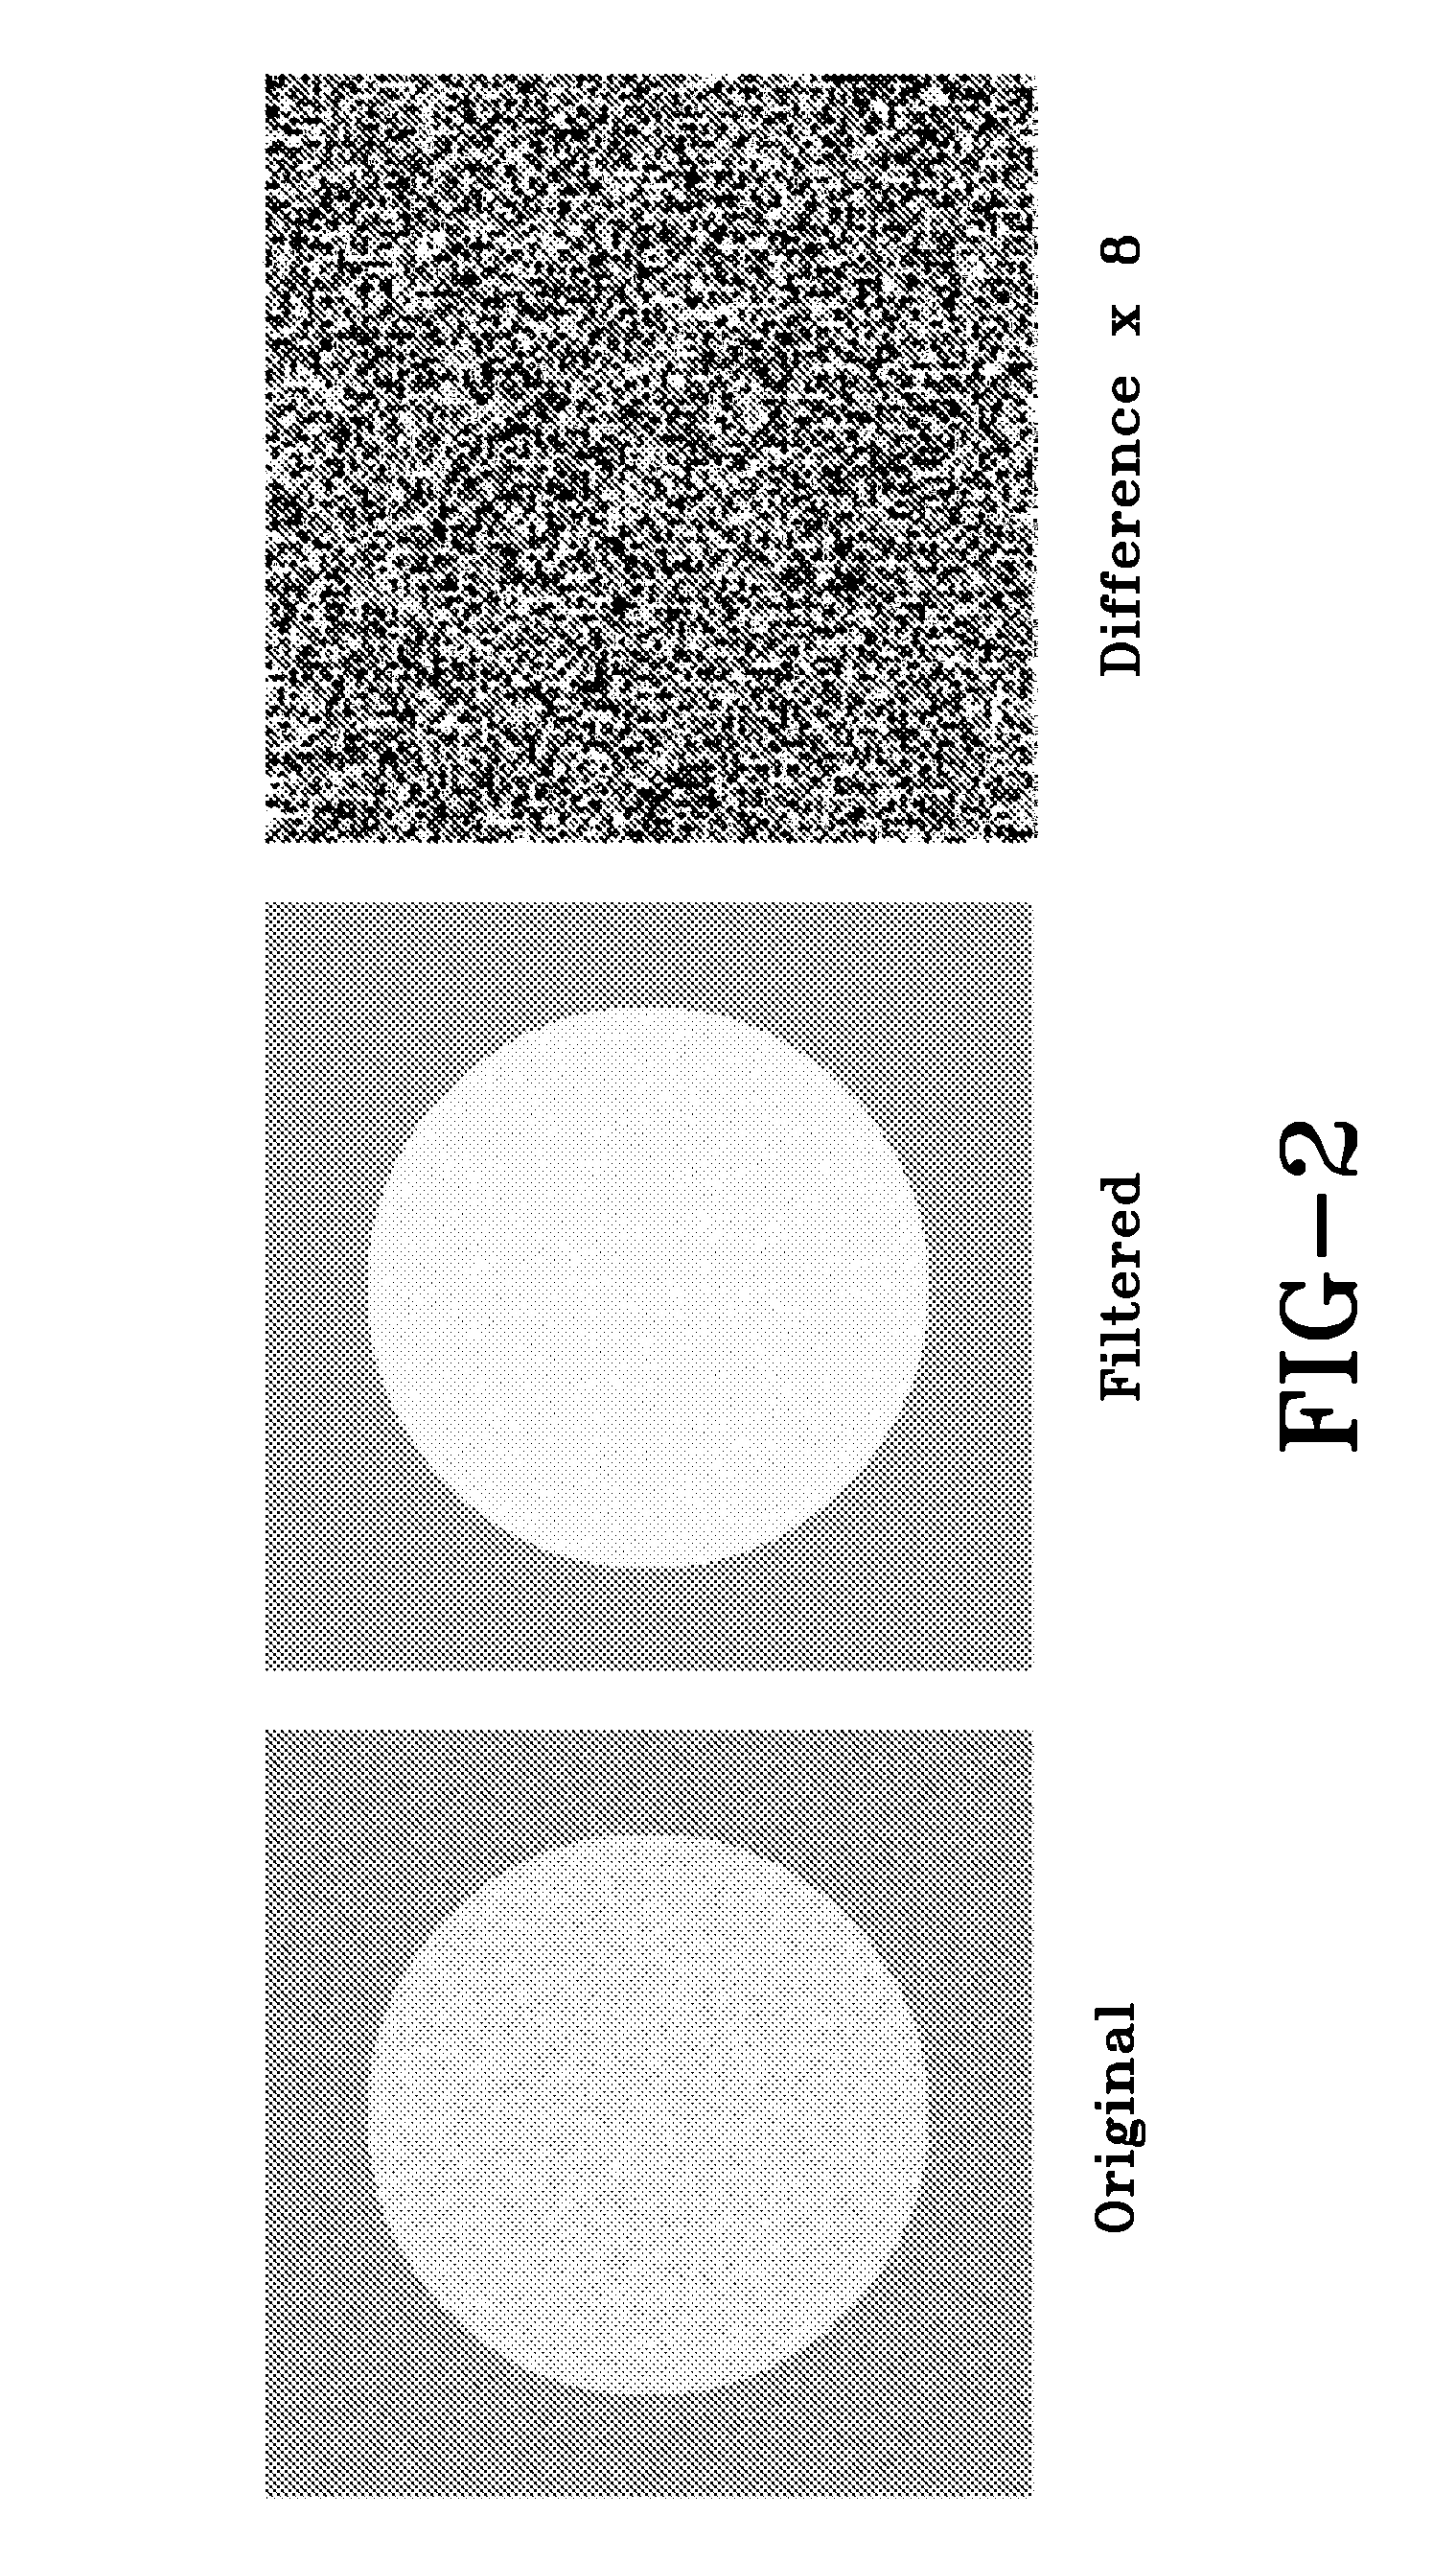 System and method for improved real-time cine imaging